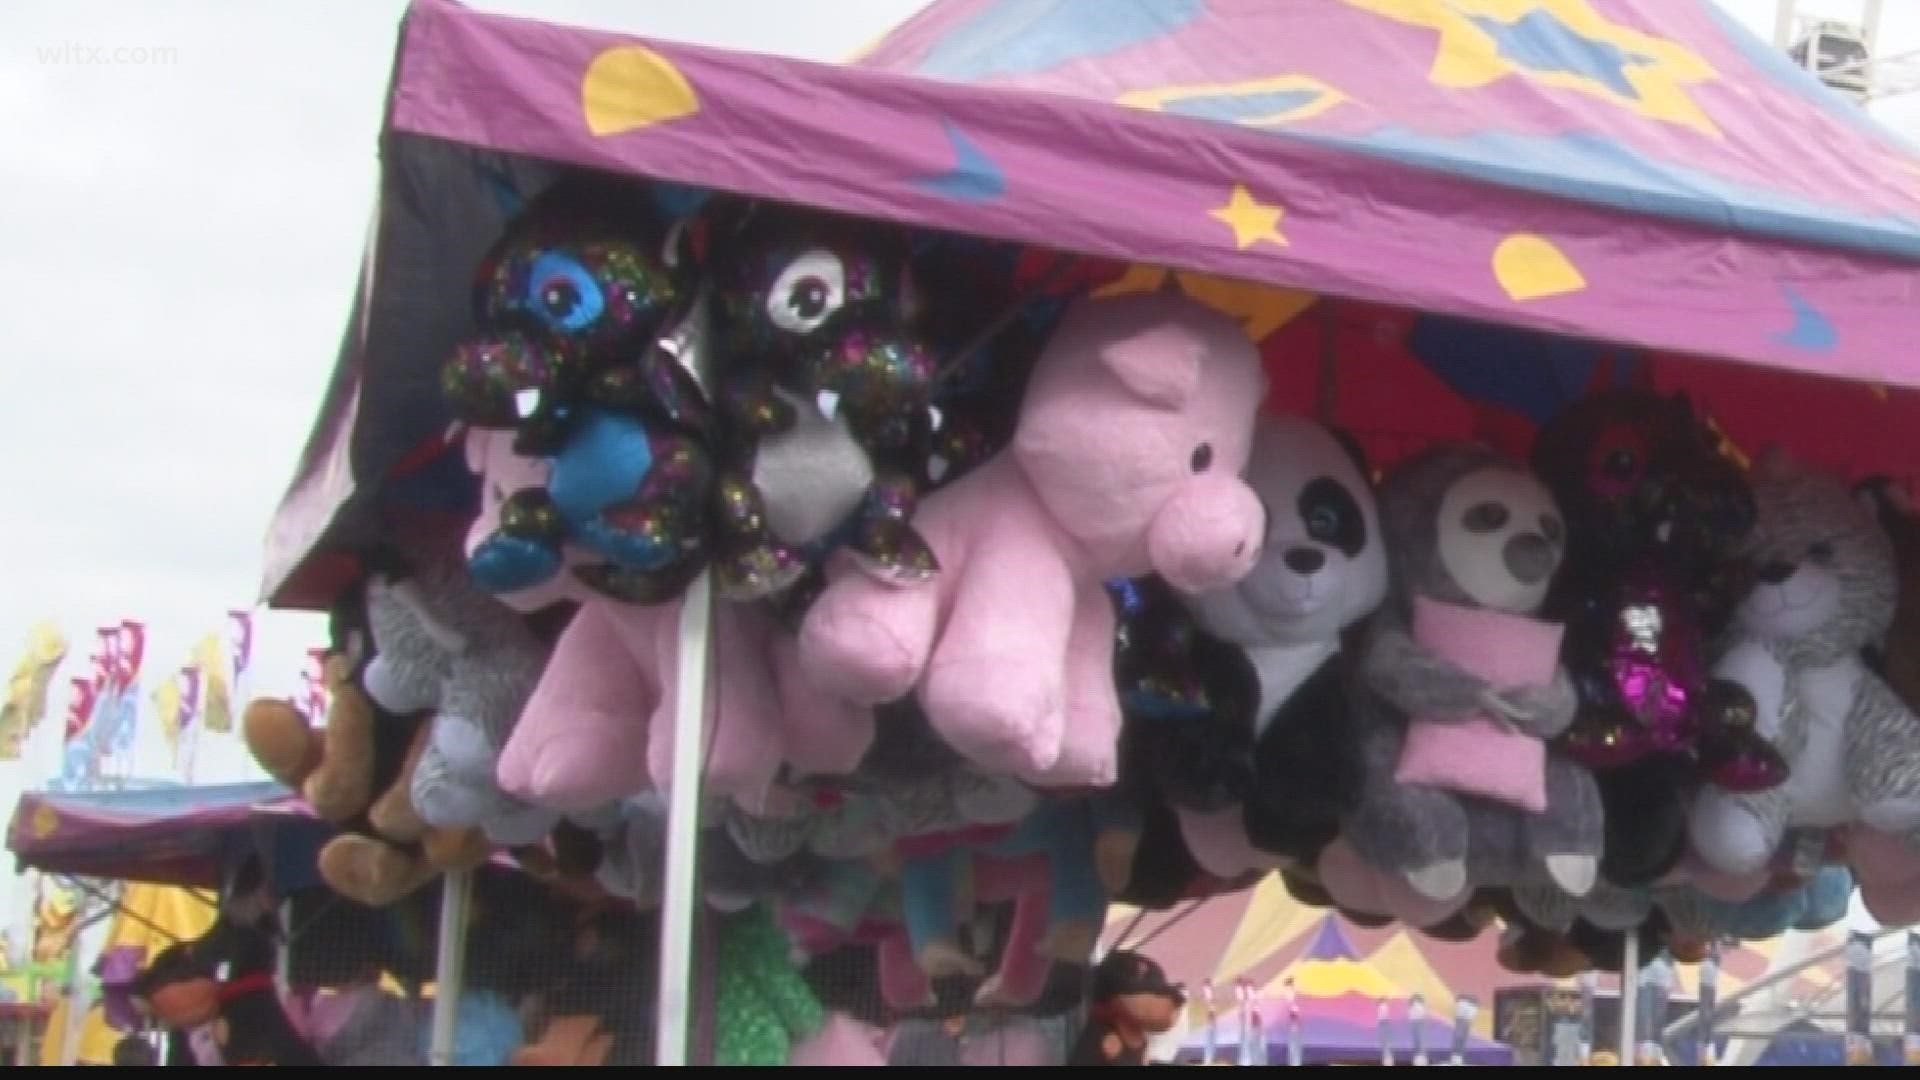 Thousands will be heading to the South Carolina State Fair, but health officials want to make sure you do it safely.